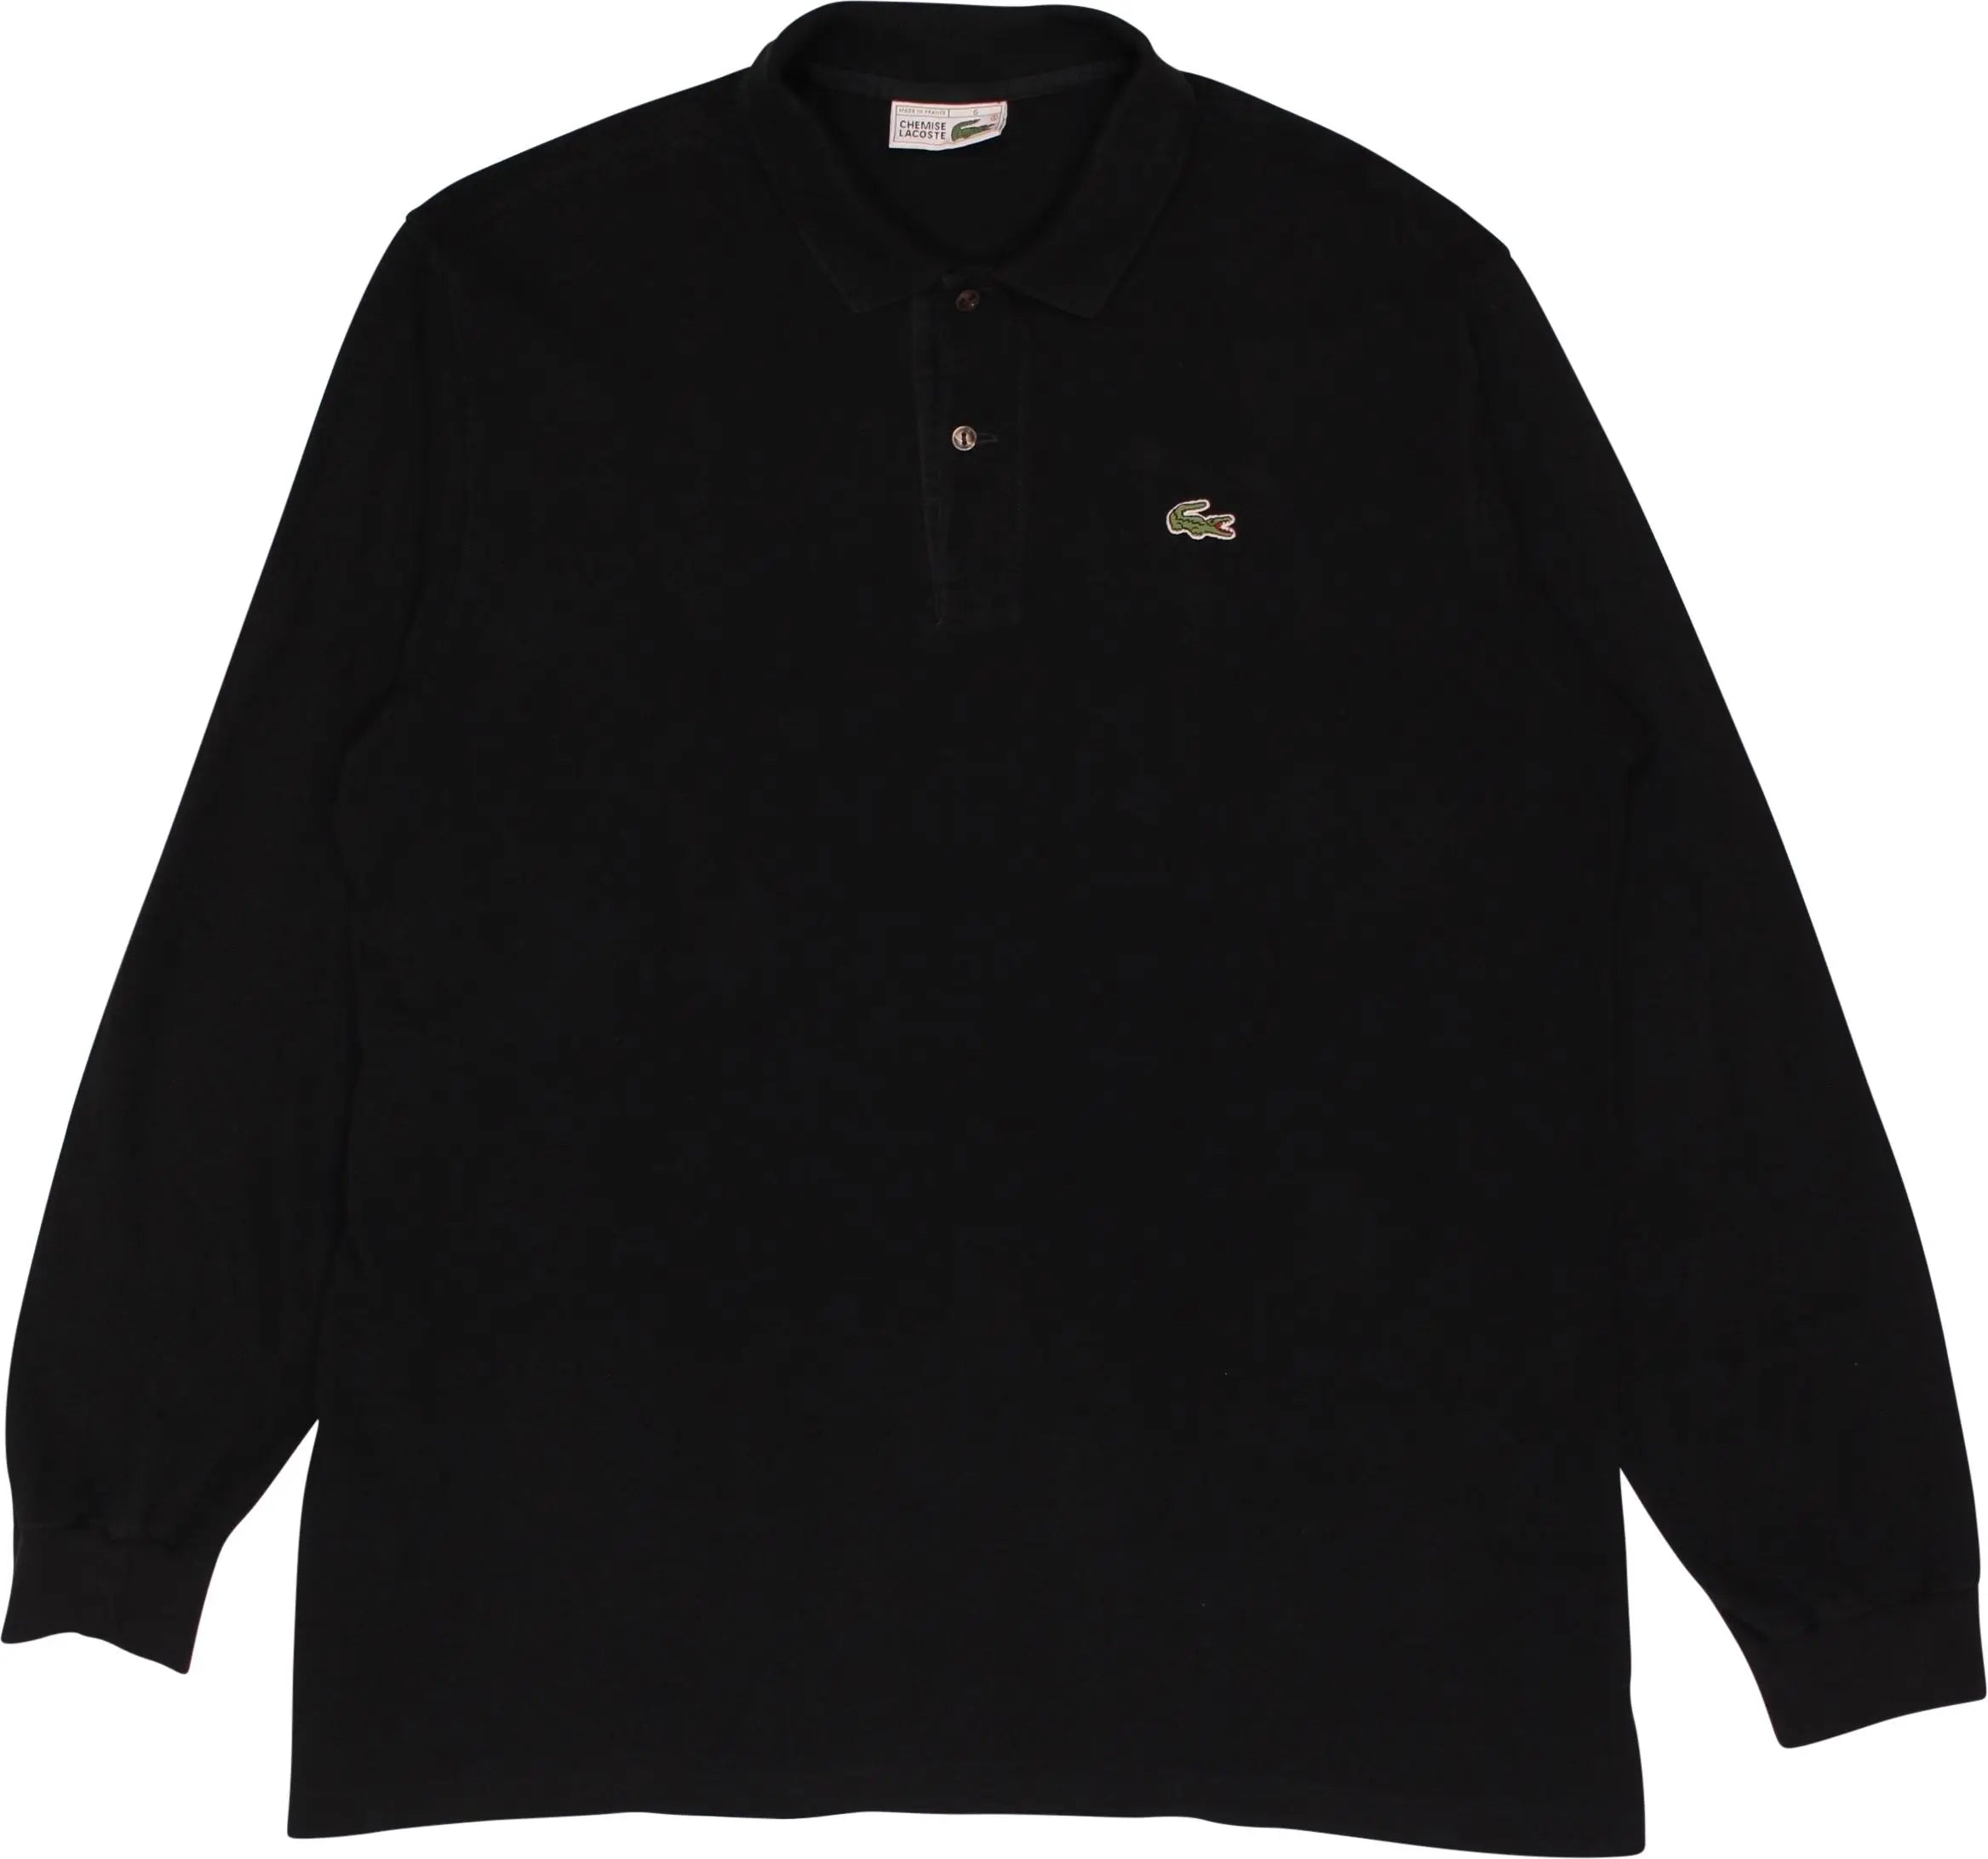 Lacoste - Black Long Sleeve Polo Shirt by Lacoste- ThriftTale.com - Vintage and second handclothing